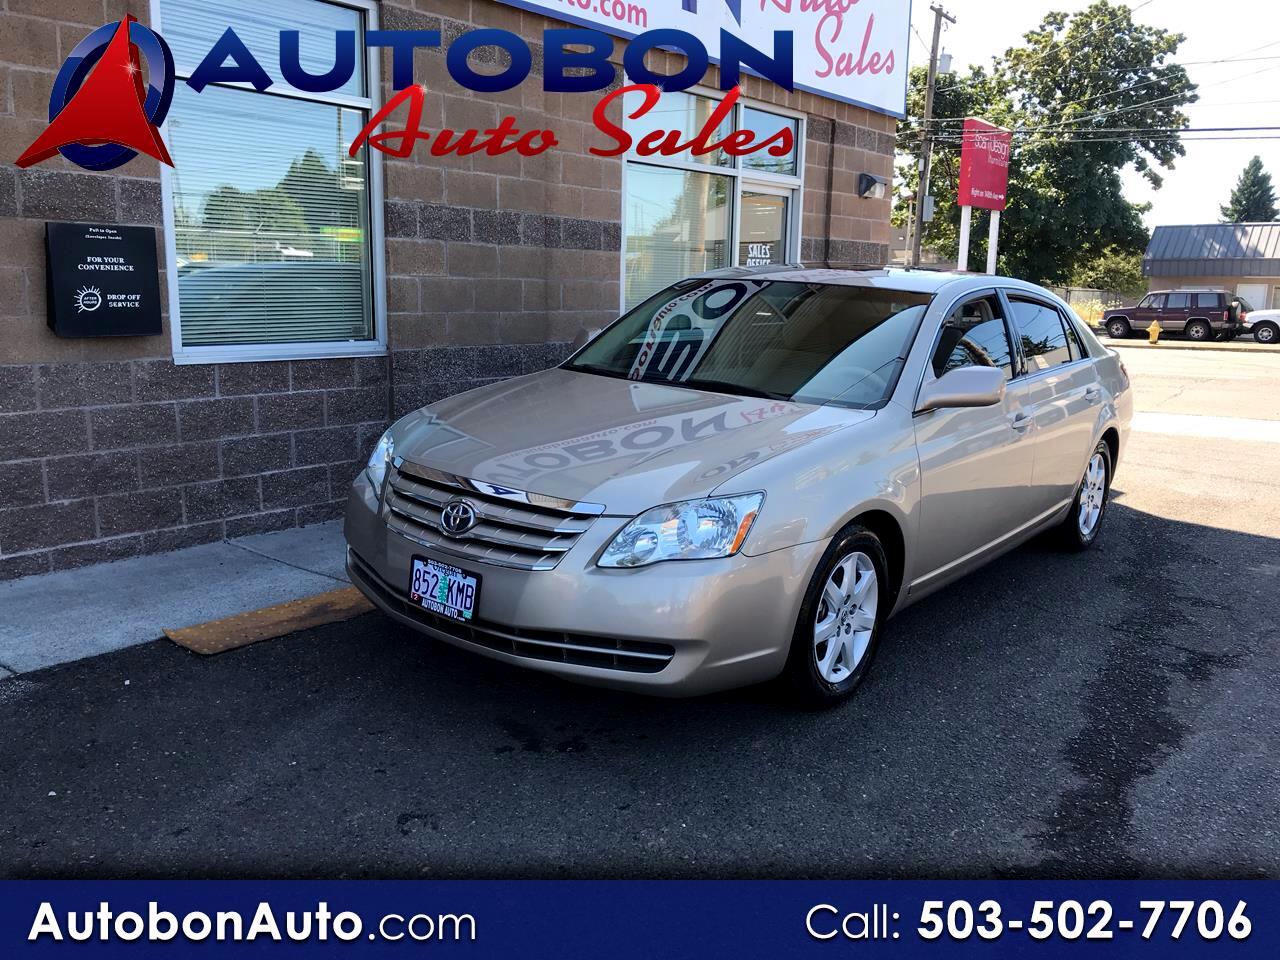 Used 2006 Toyota Avalon 4dr Sdn Xl Natl For Sale In